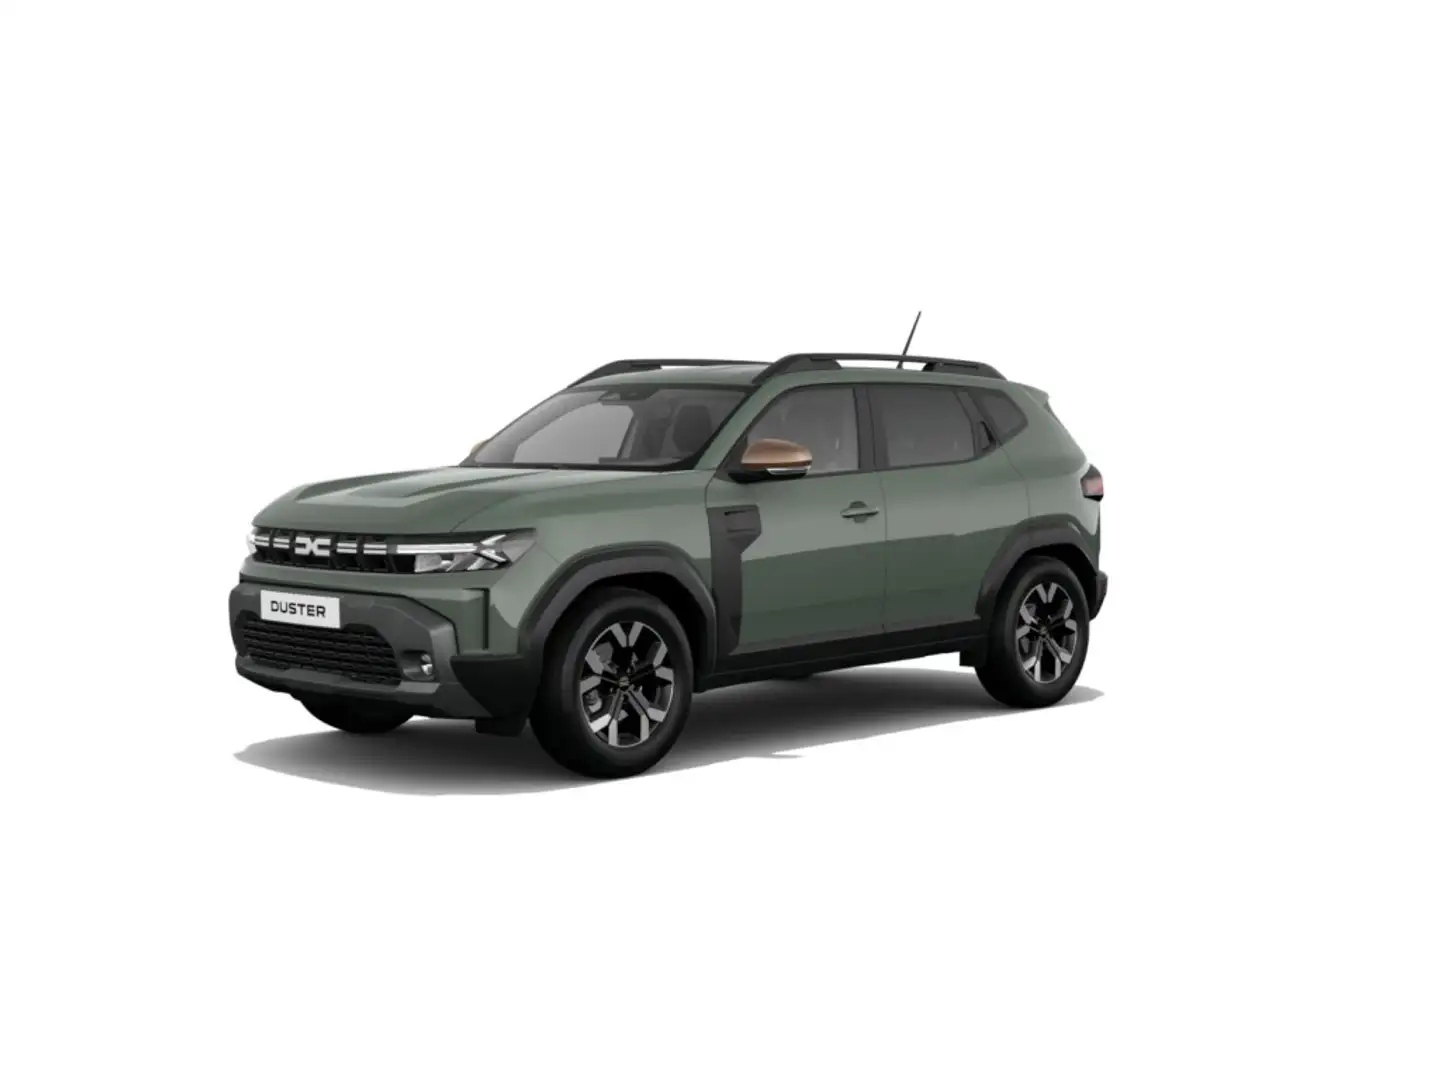 Dacia Duster 1.2 TCe Extreme 4x2 96kW 48v Verde - 1